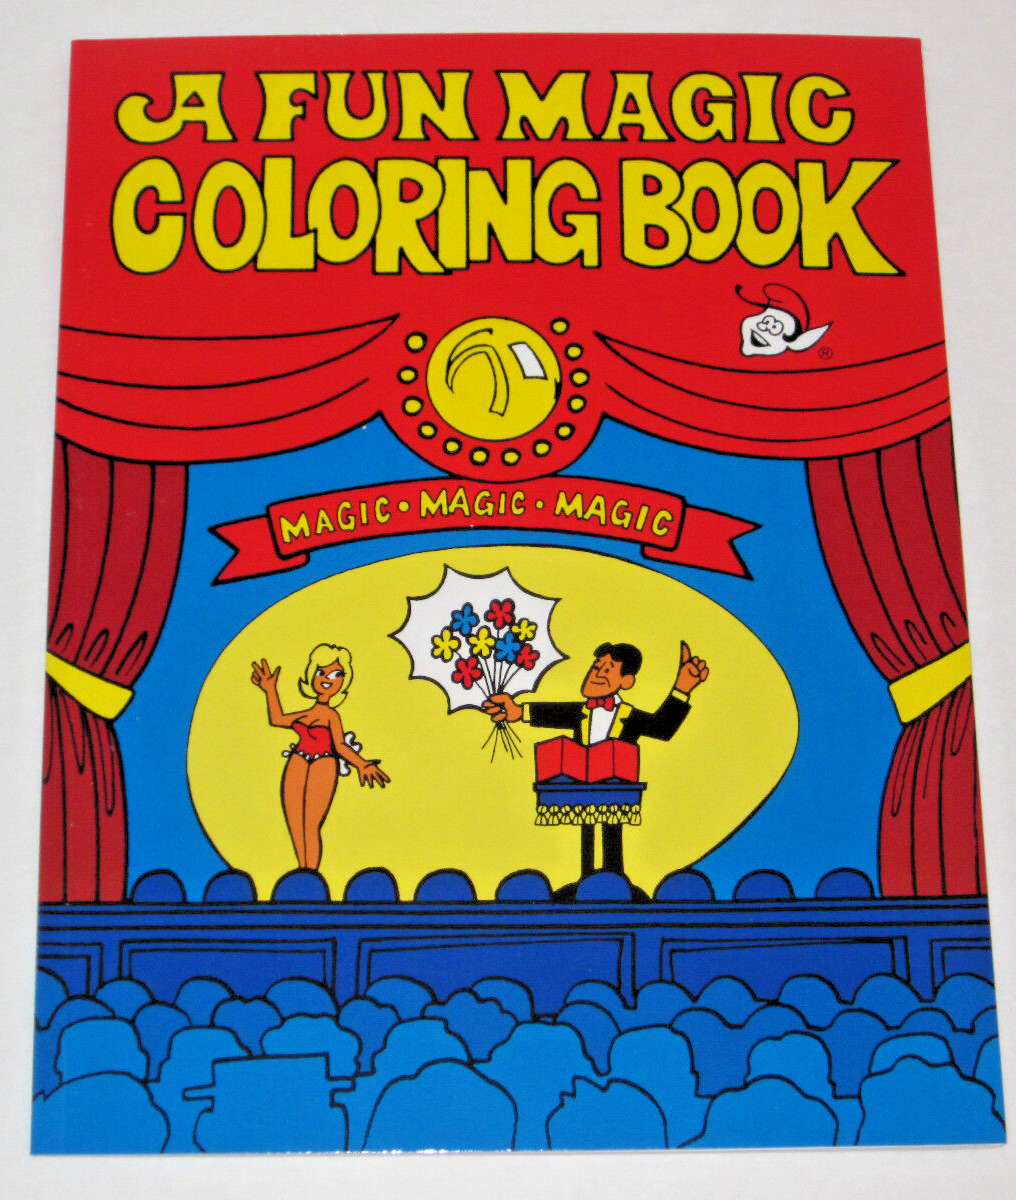 The Magic Coloring Book Magic Trick - Children's Magic, Birthday Parties, Stage